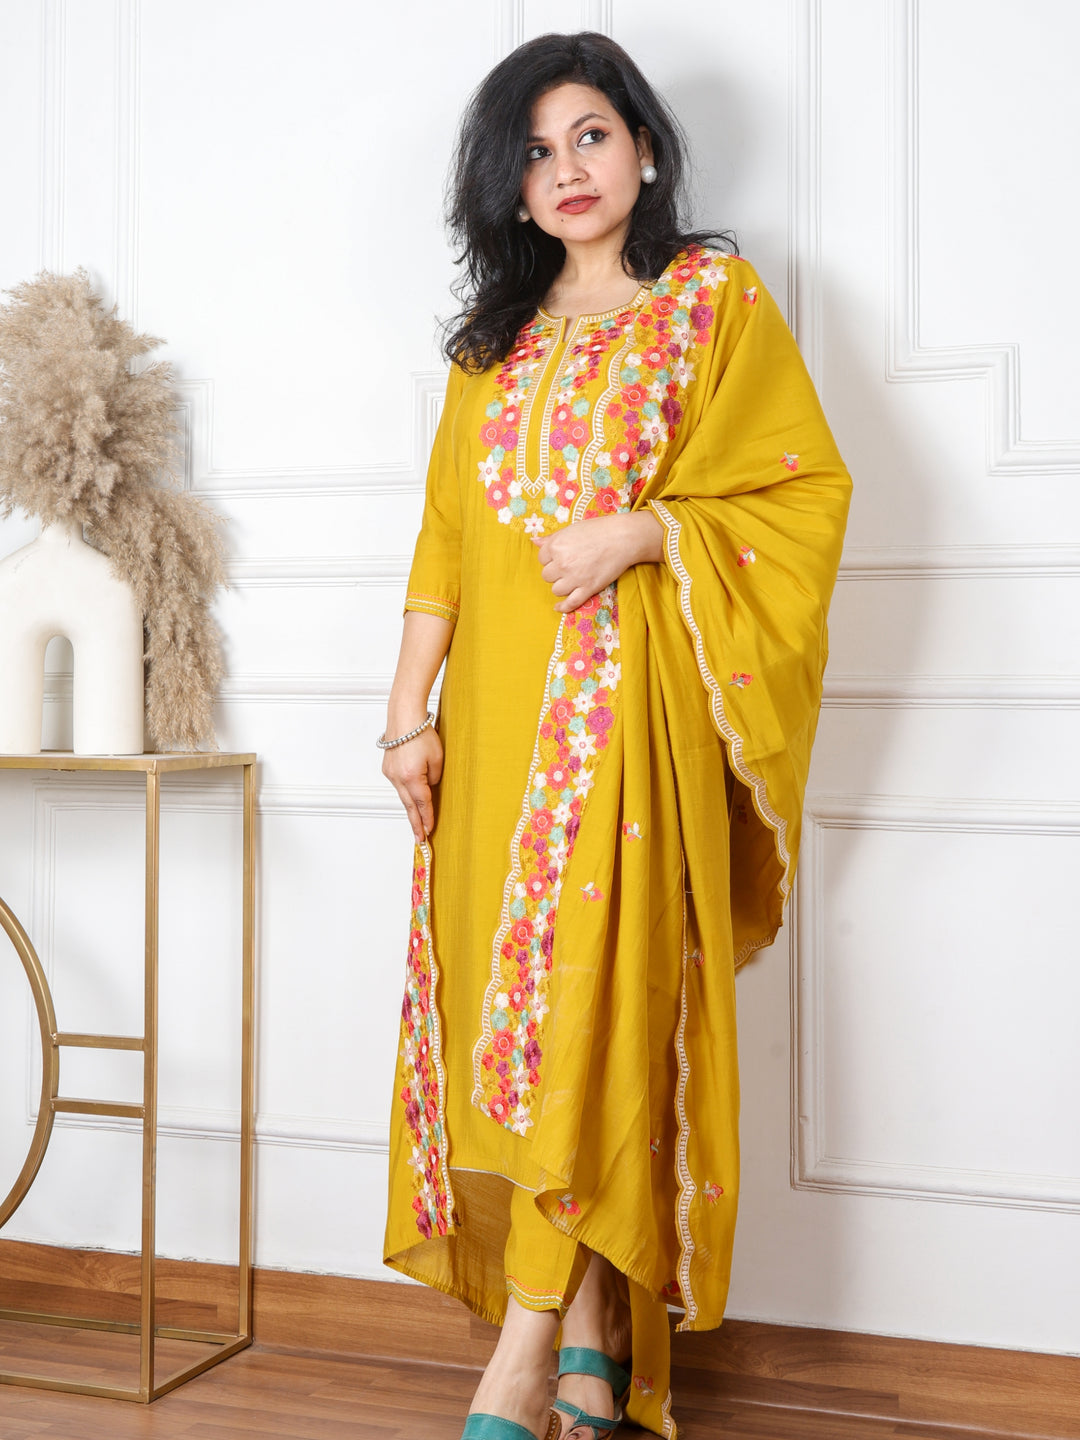 Naina Dandelion Yellow Floral Thread Embroidered Neck Modal Suit 3 Piece Set